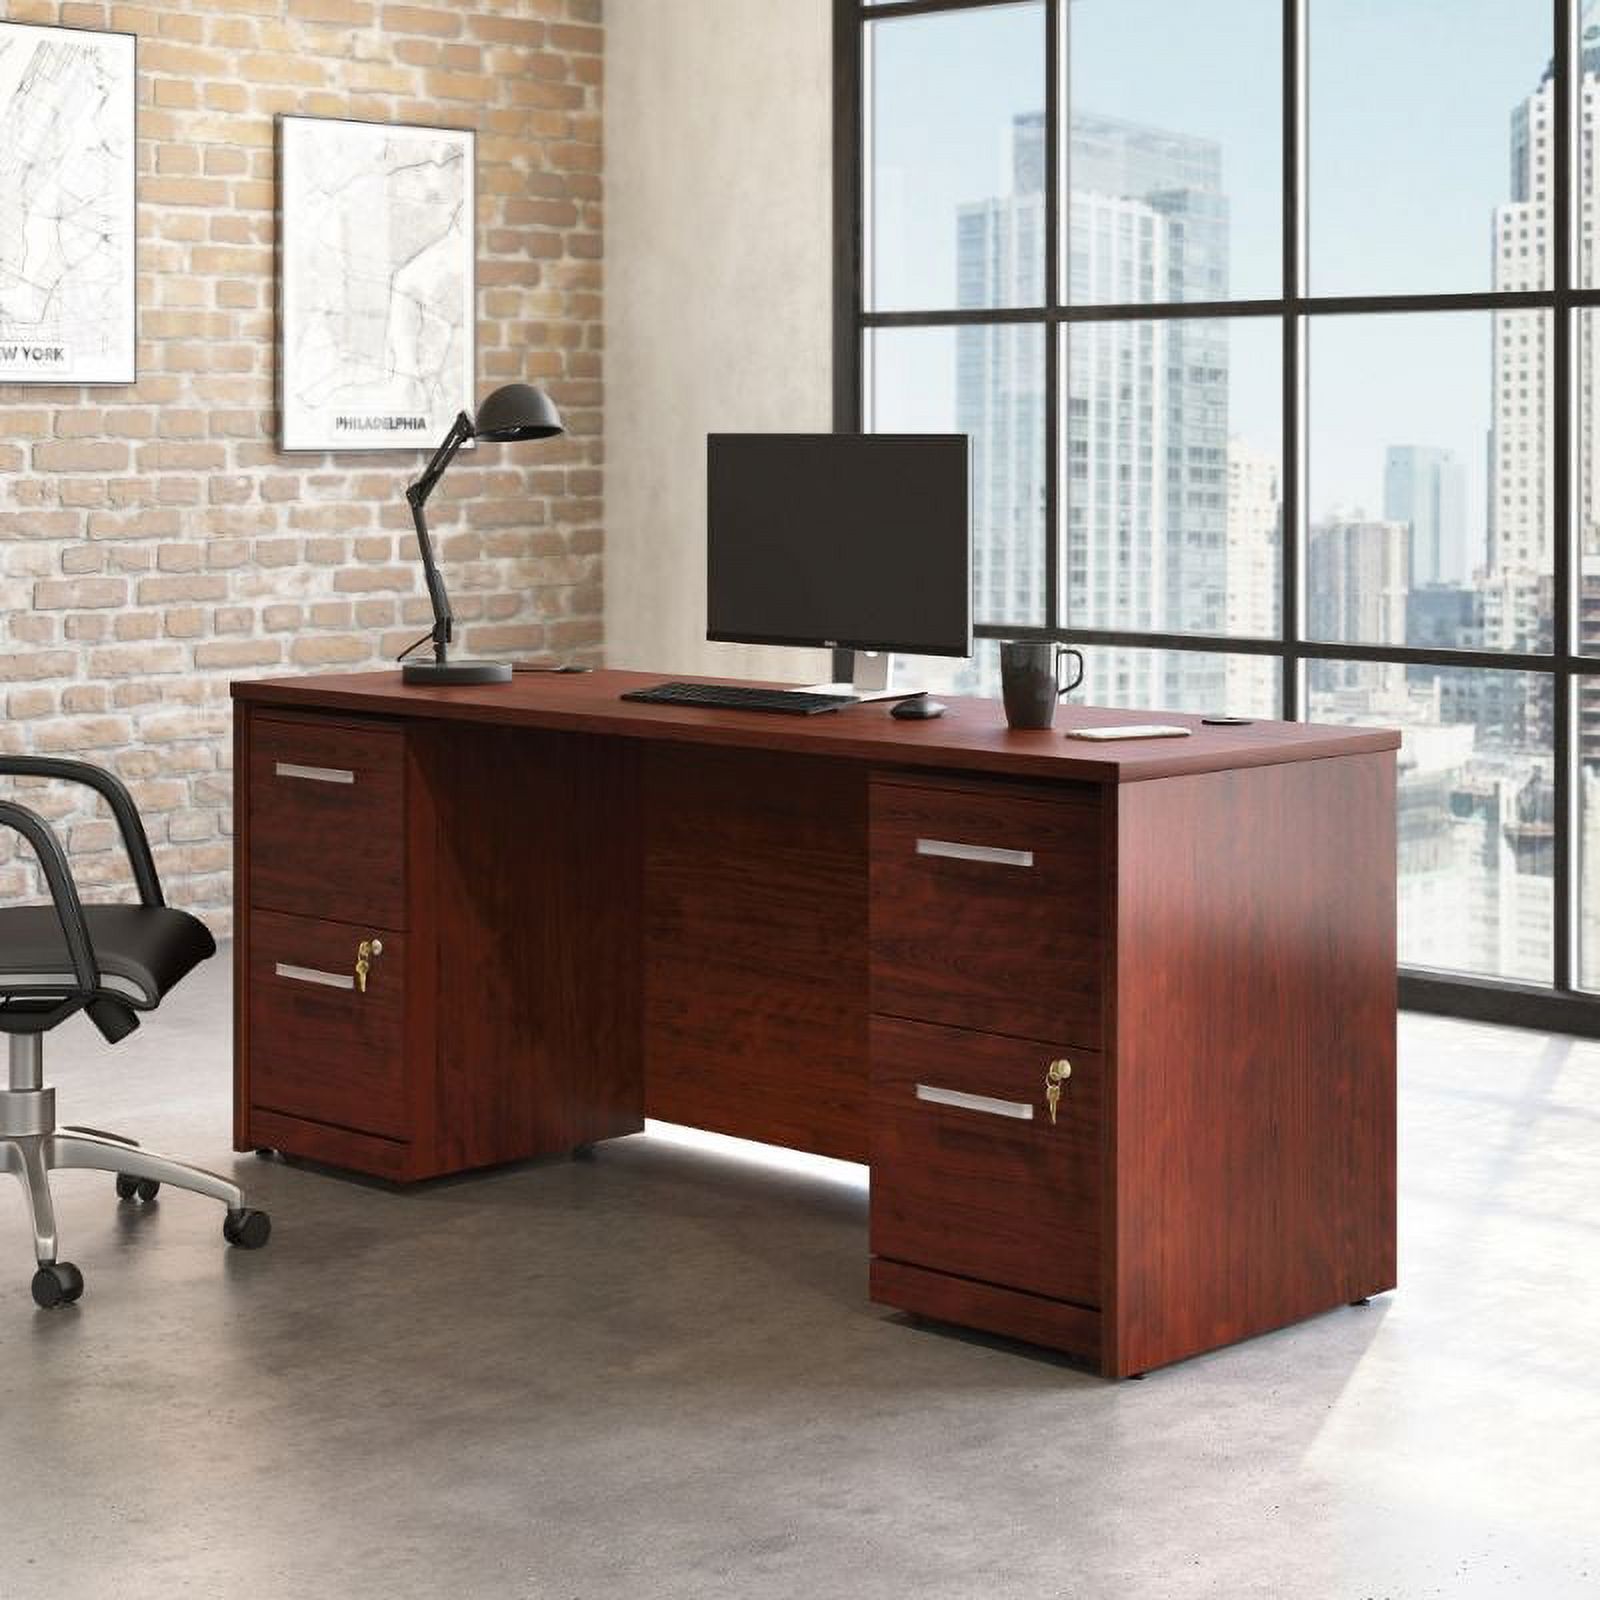 UrbanPro 72" x 24" Shell and Two 2-Drawers Mobile File Cabinet in Cherry - image 3 of 3